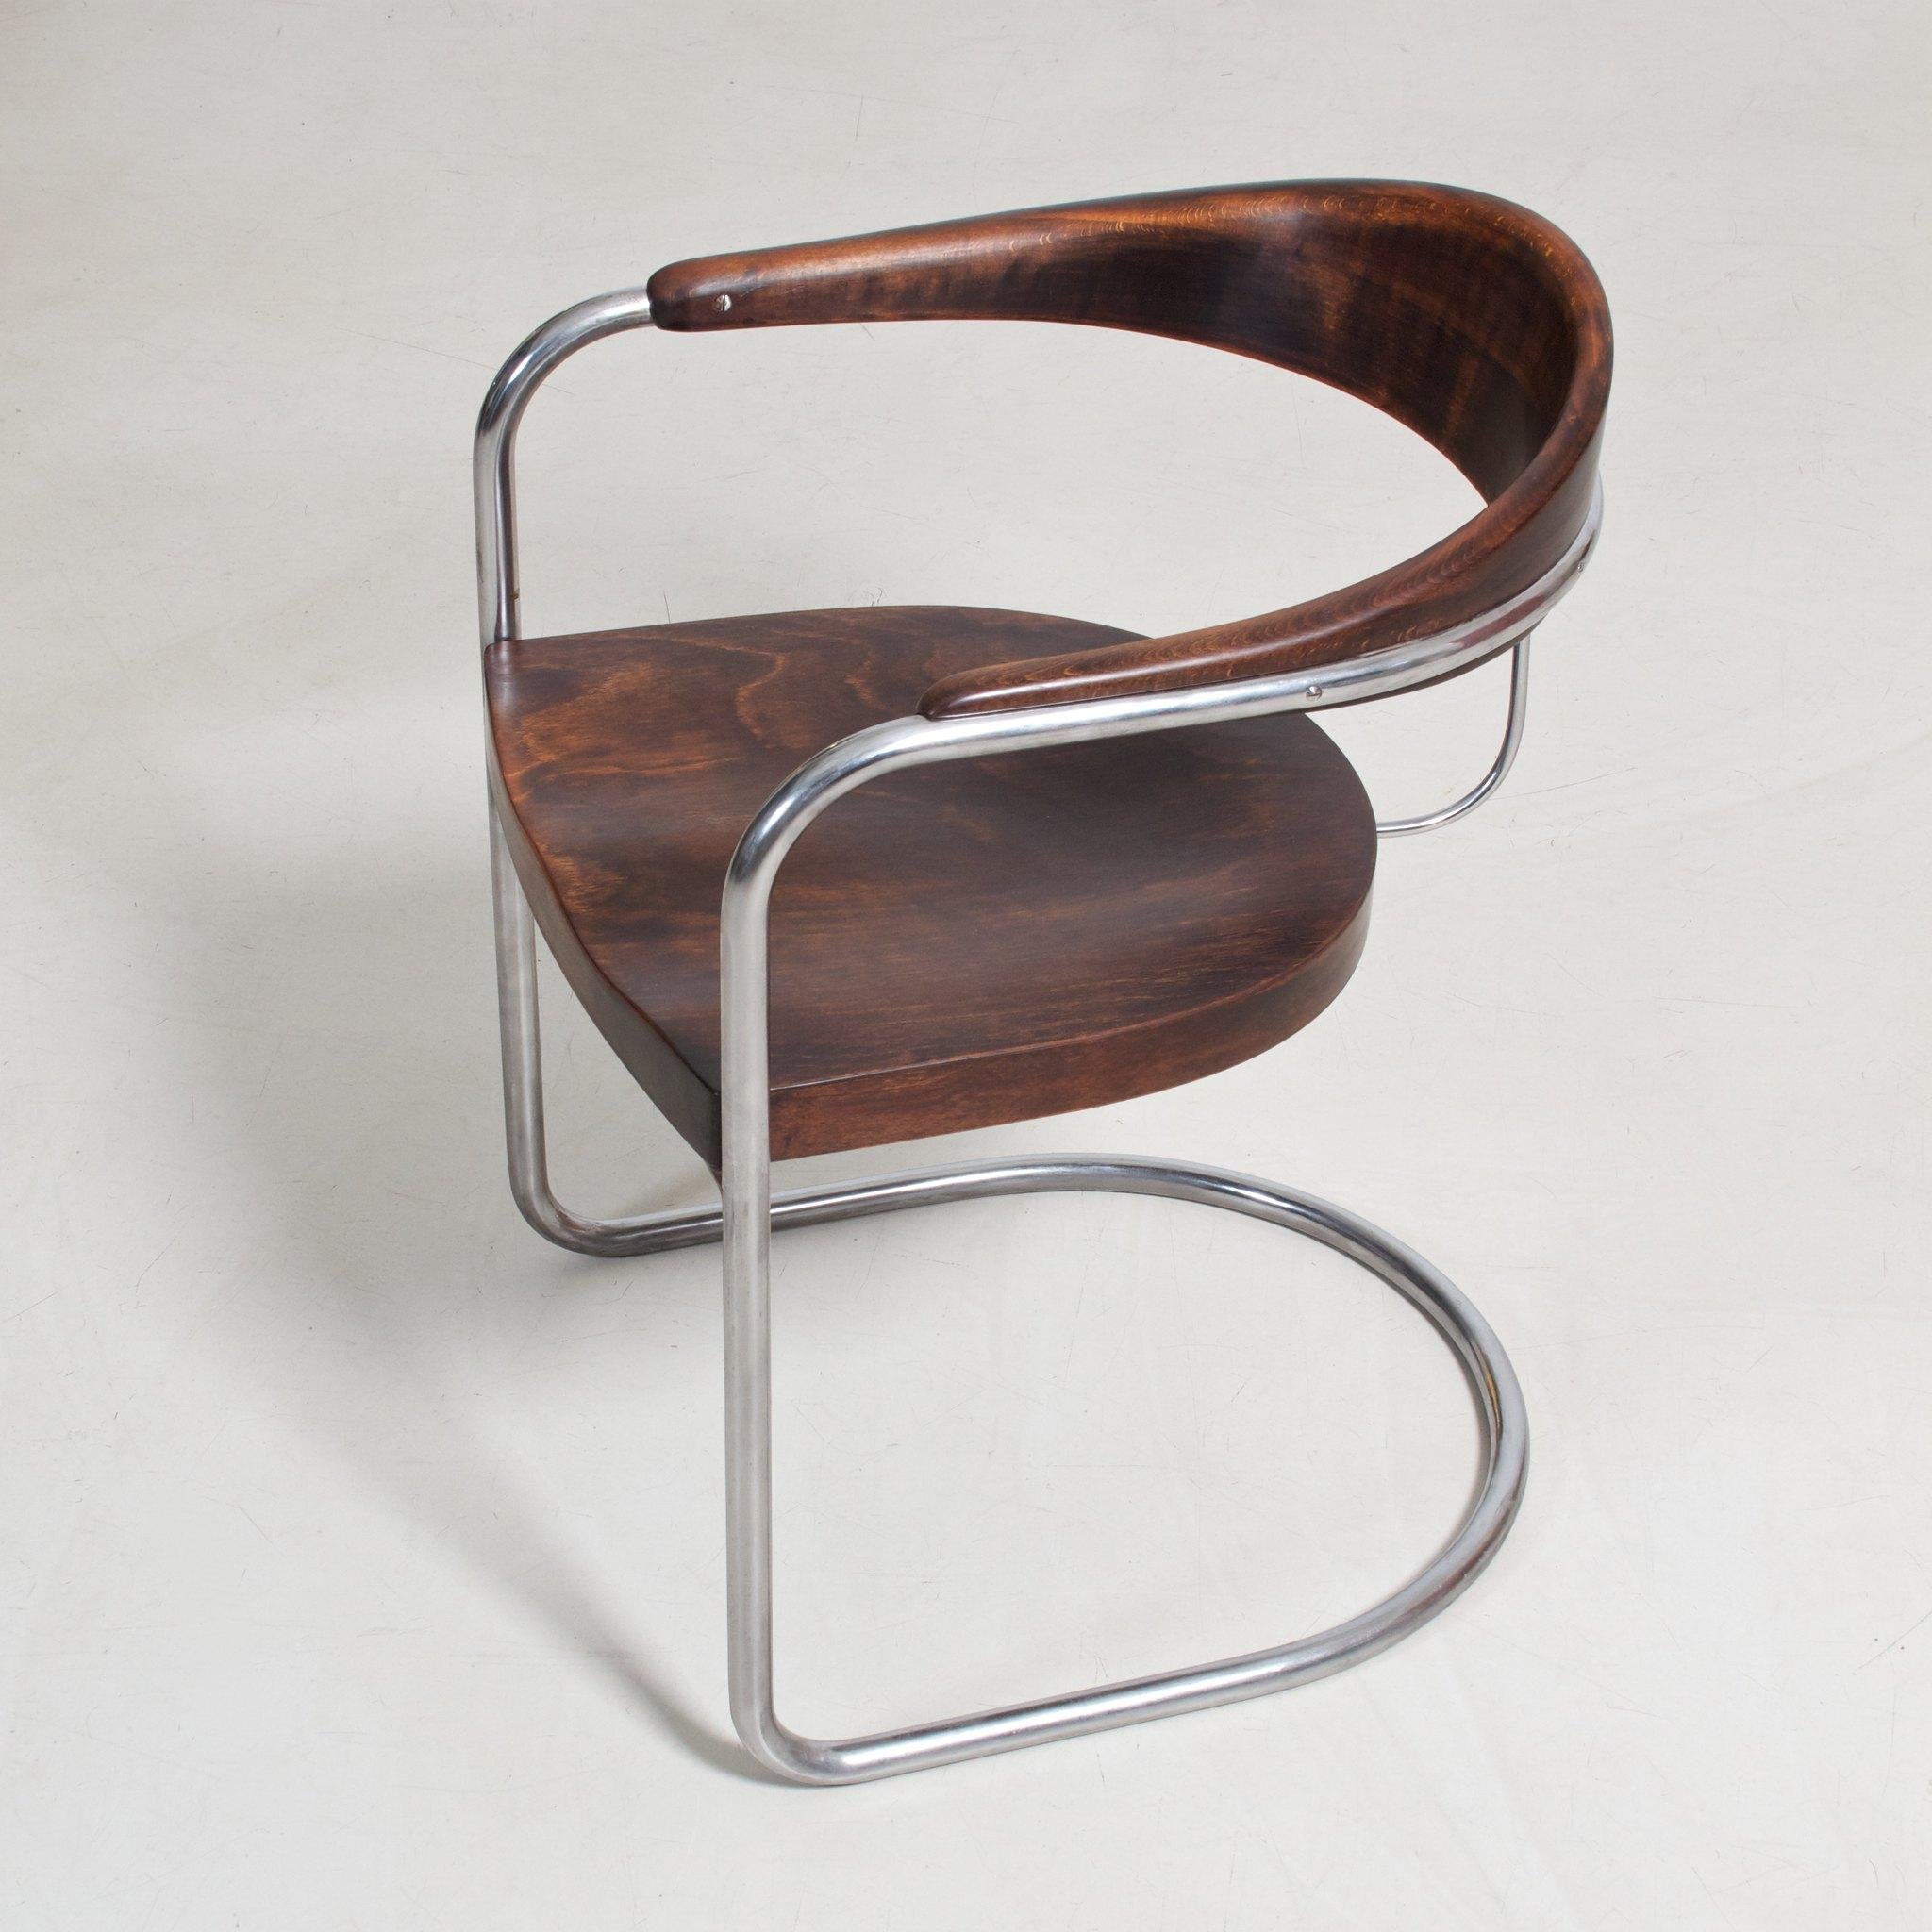 Bauhaus cantilever chair SS 33 designed by Hans and Wassili Luckhardt. Chromium plated tubular steel and stained wood, manufactured c. 1930.

This item is restored on request and available in different amounts. 
Delivery time: 8-9 weeks.